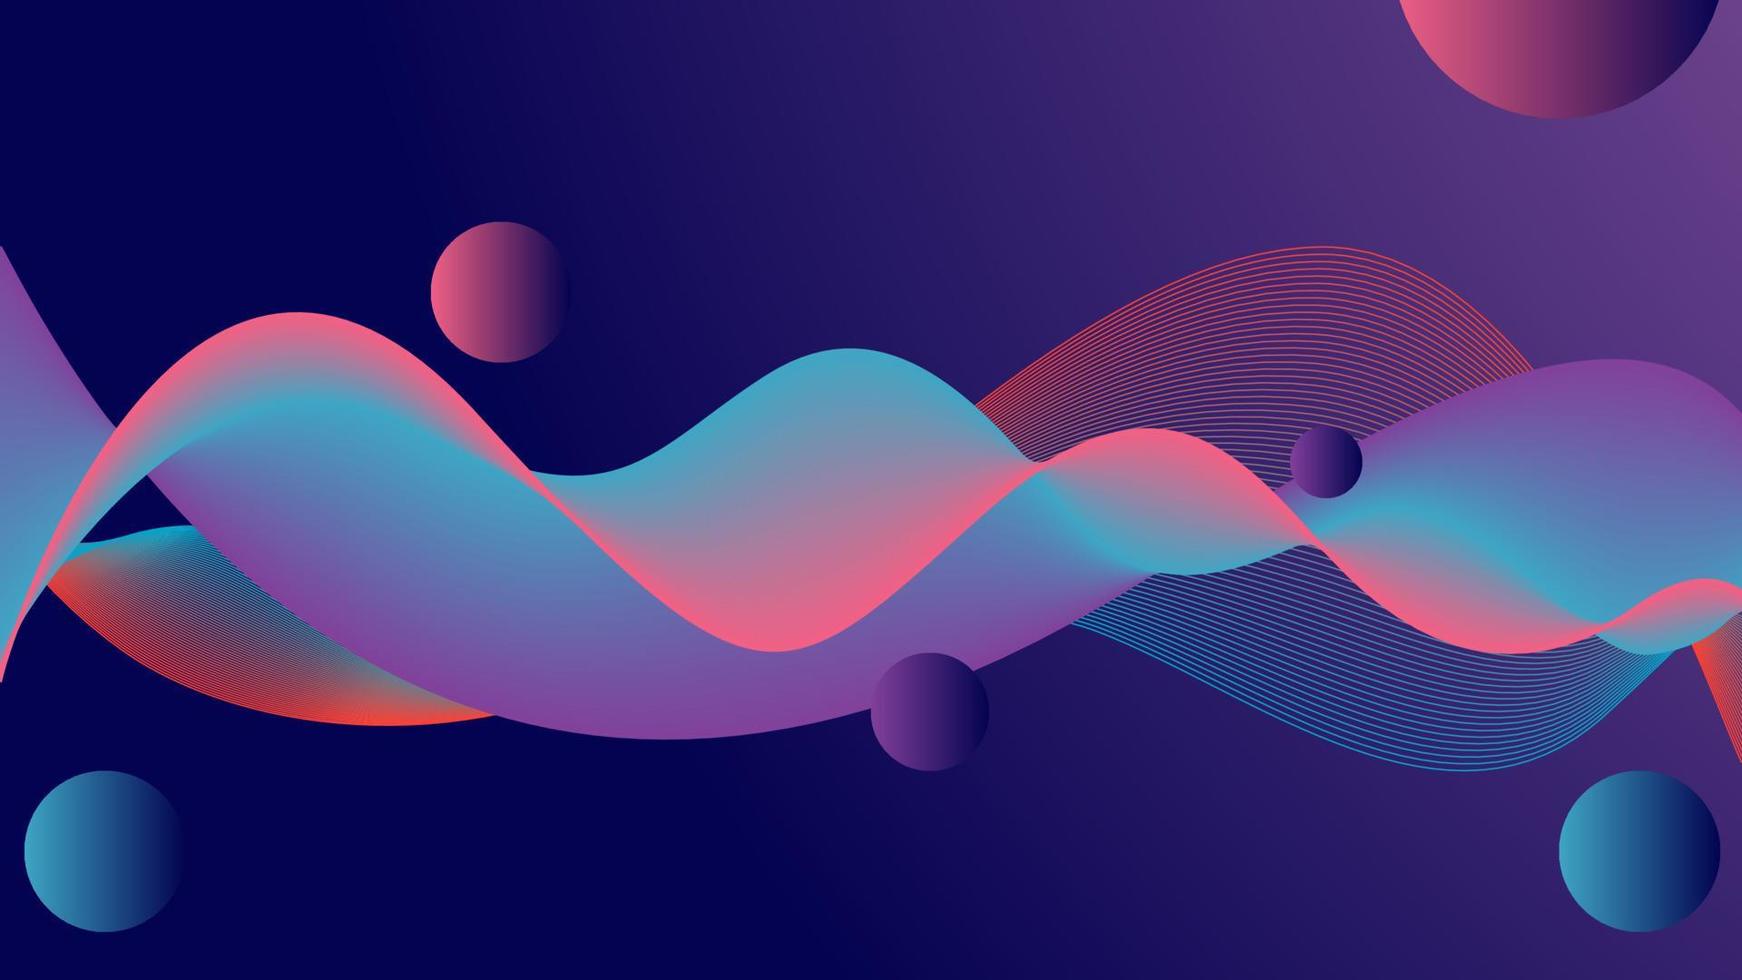 Abstract modern smooth color light waves background vector